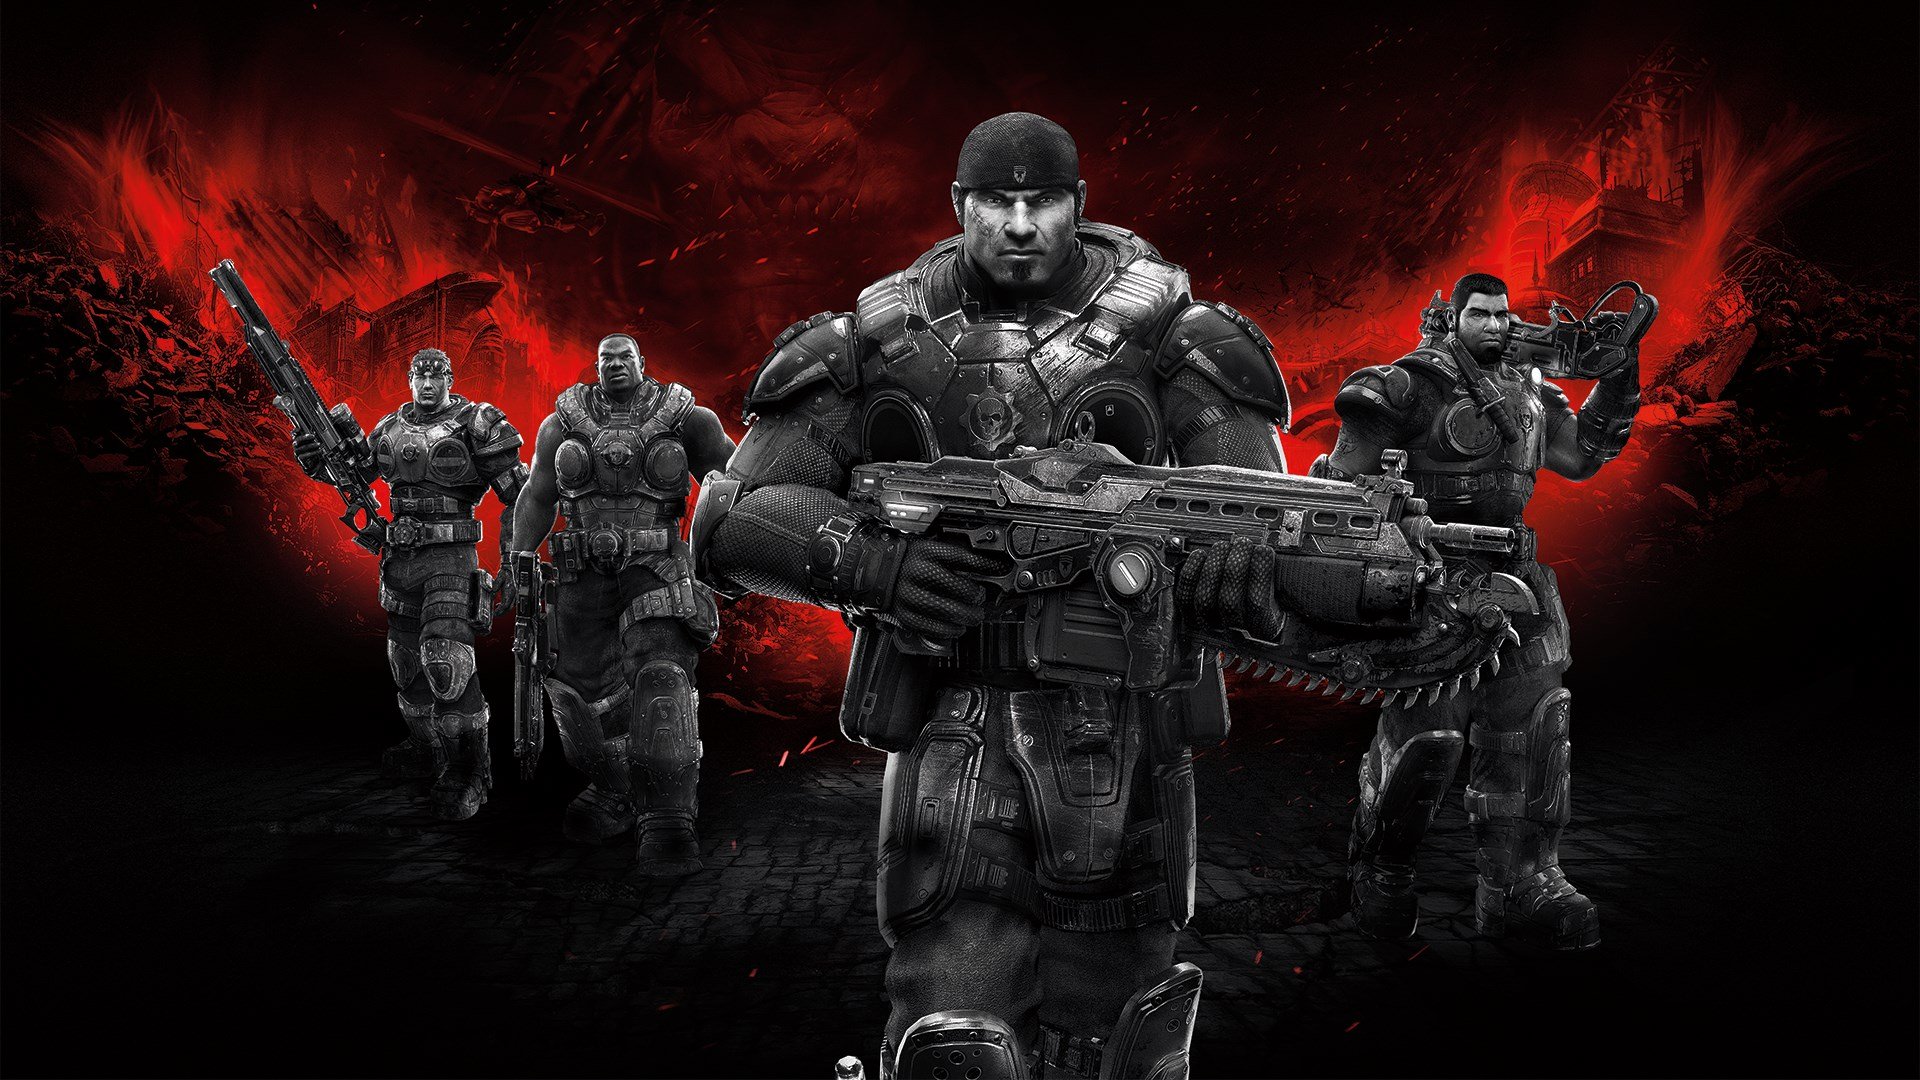 Gears of War: Ultimate Edition for Windows 10 cover image